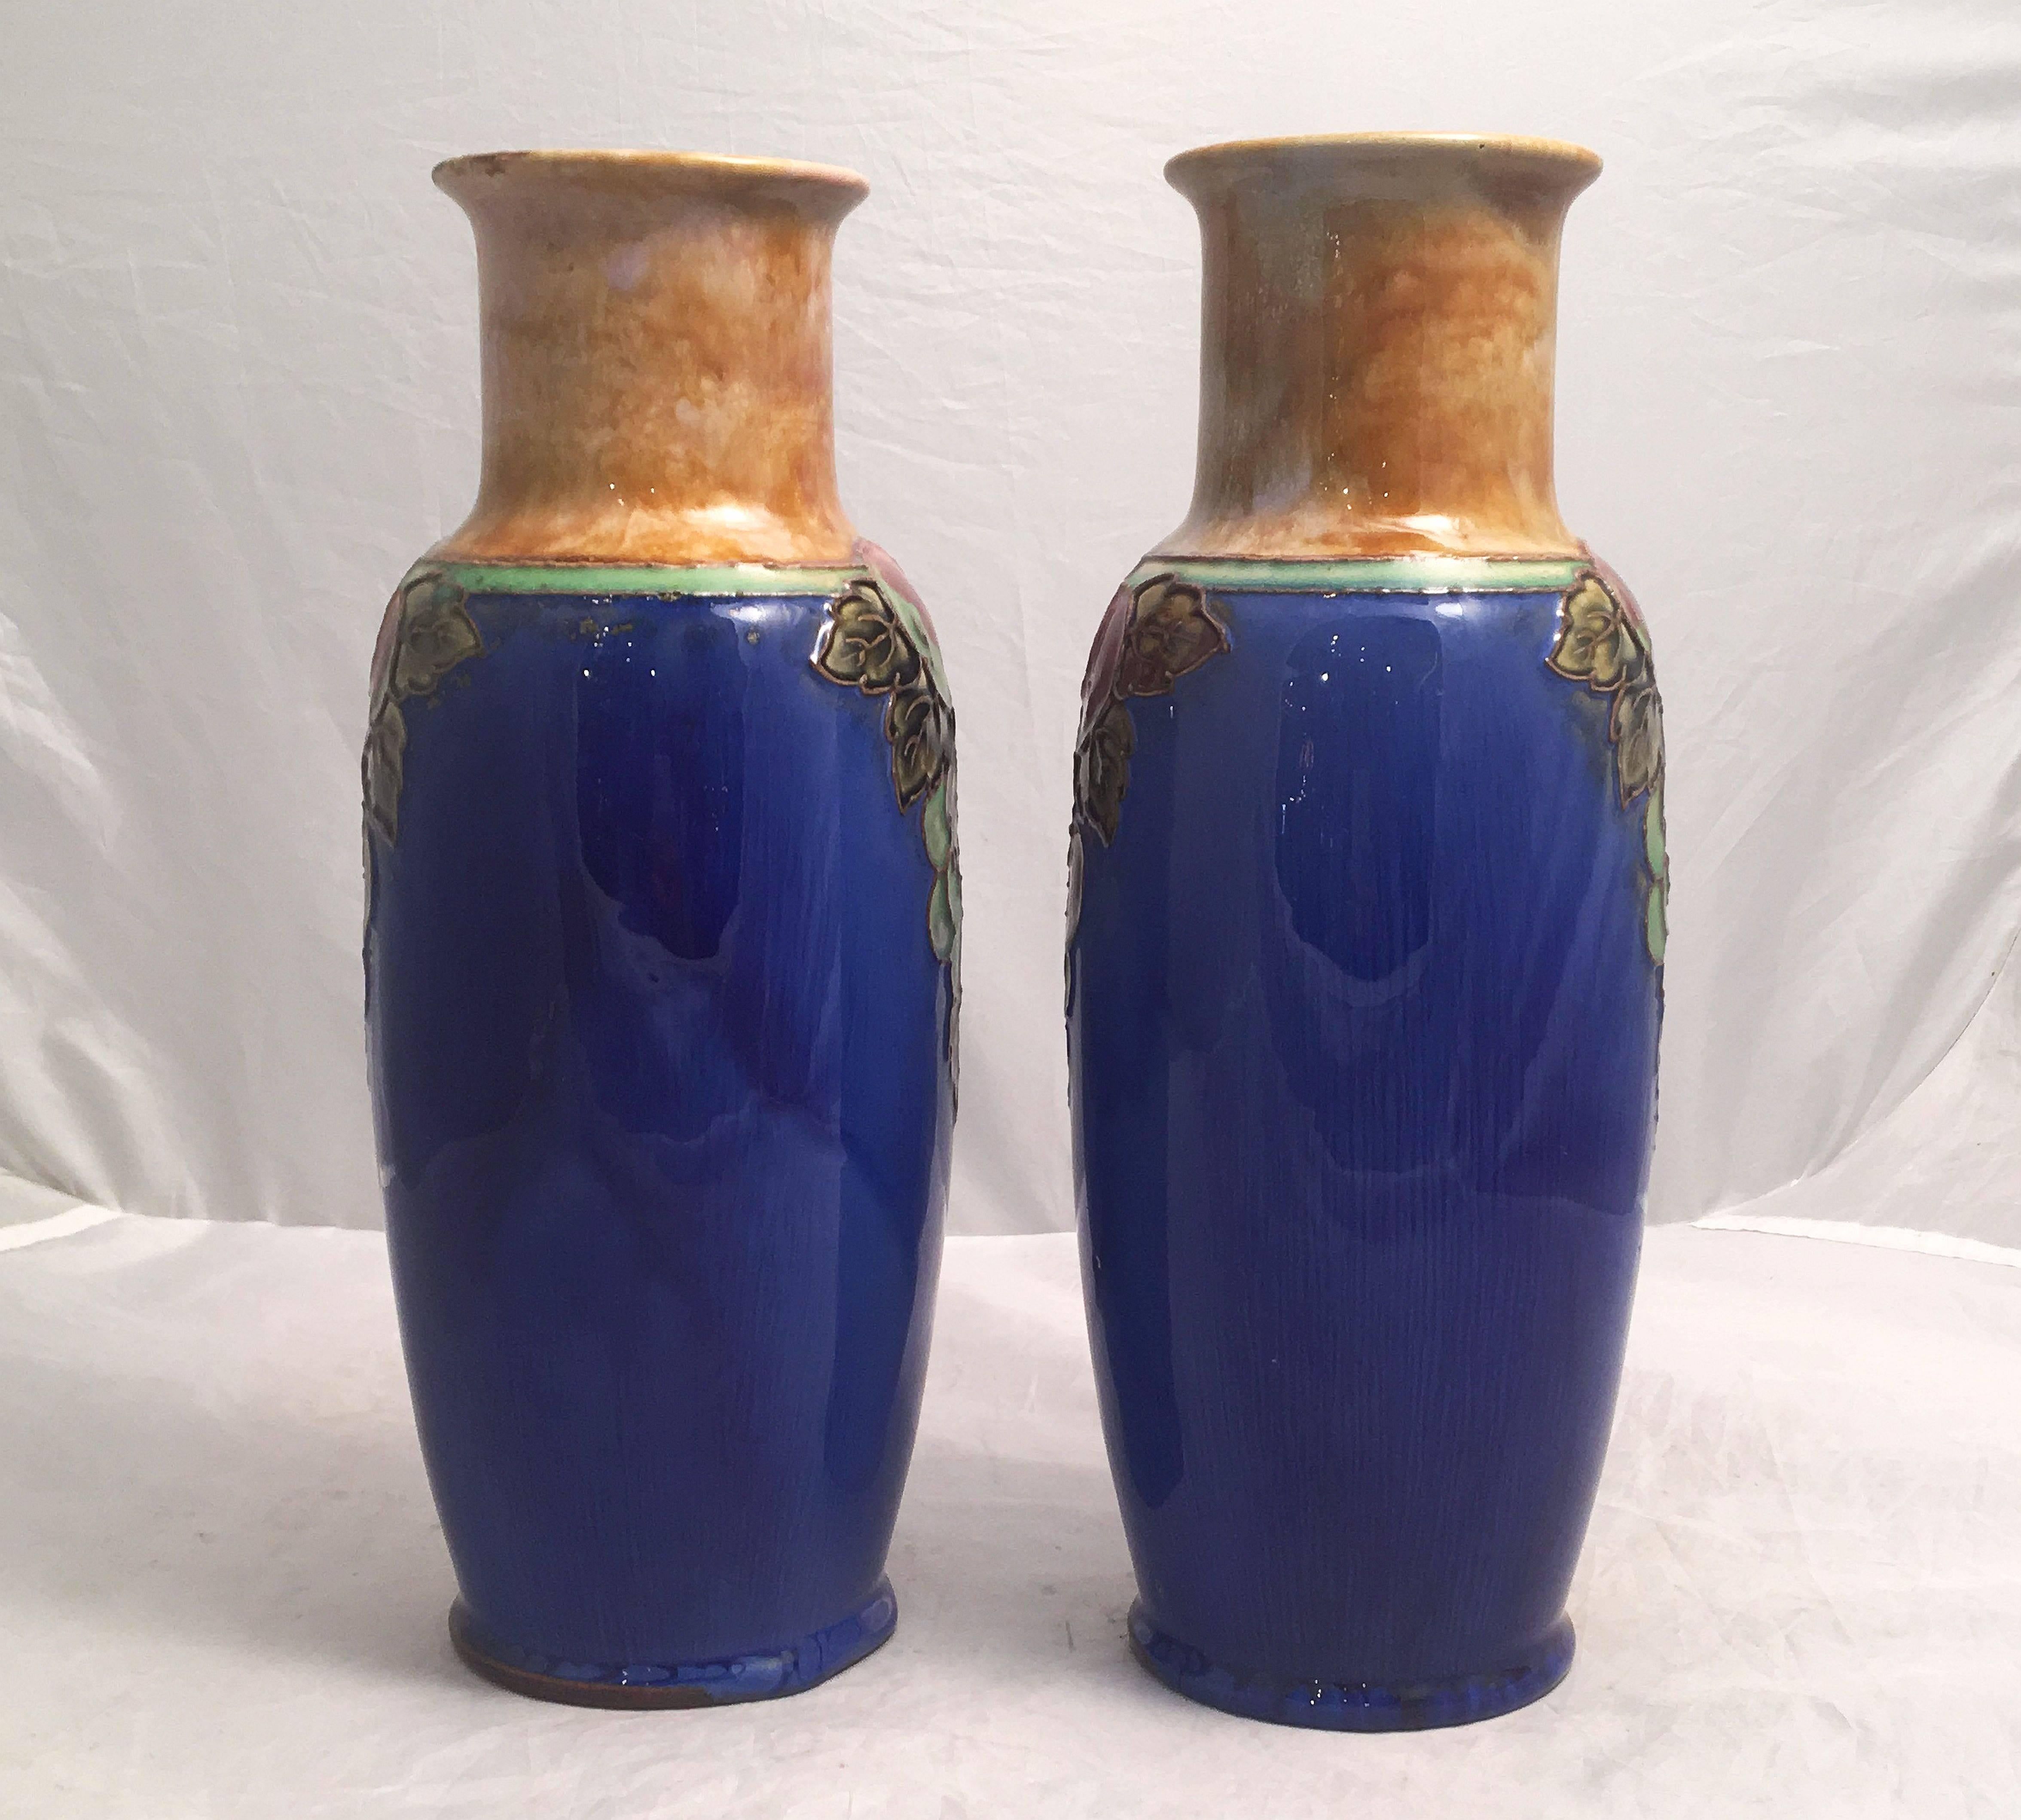 20th Century Royal Doulton Grape Cluster Vases from the Arts and Crafts Period For Sale